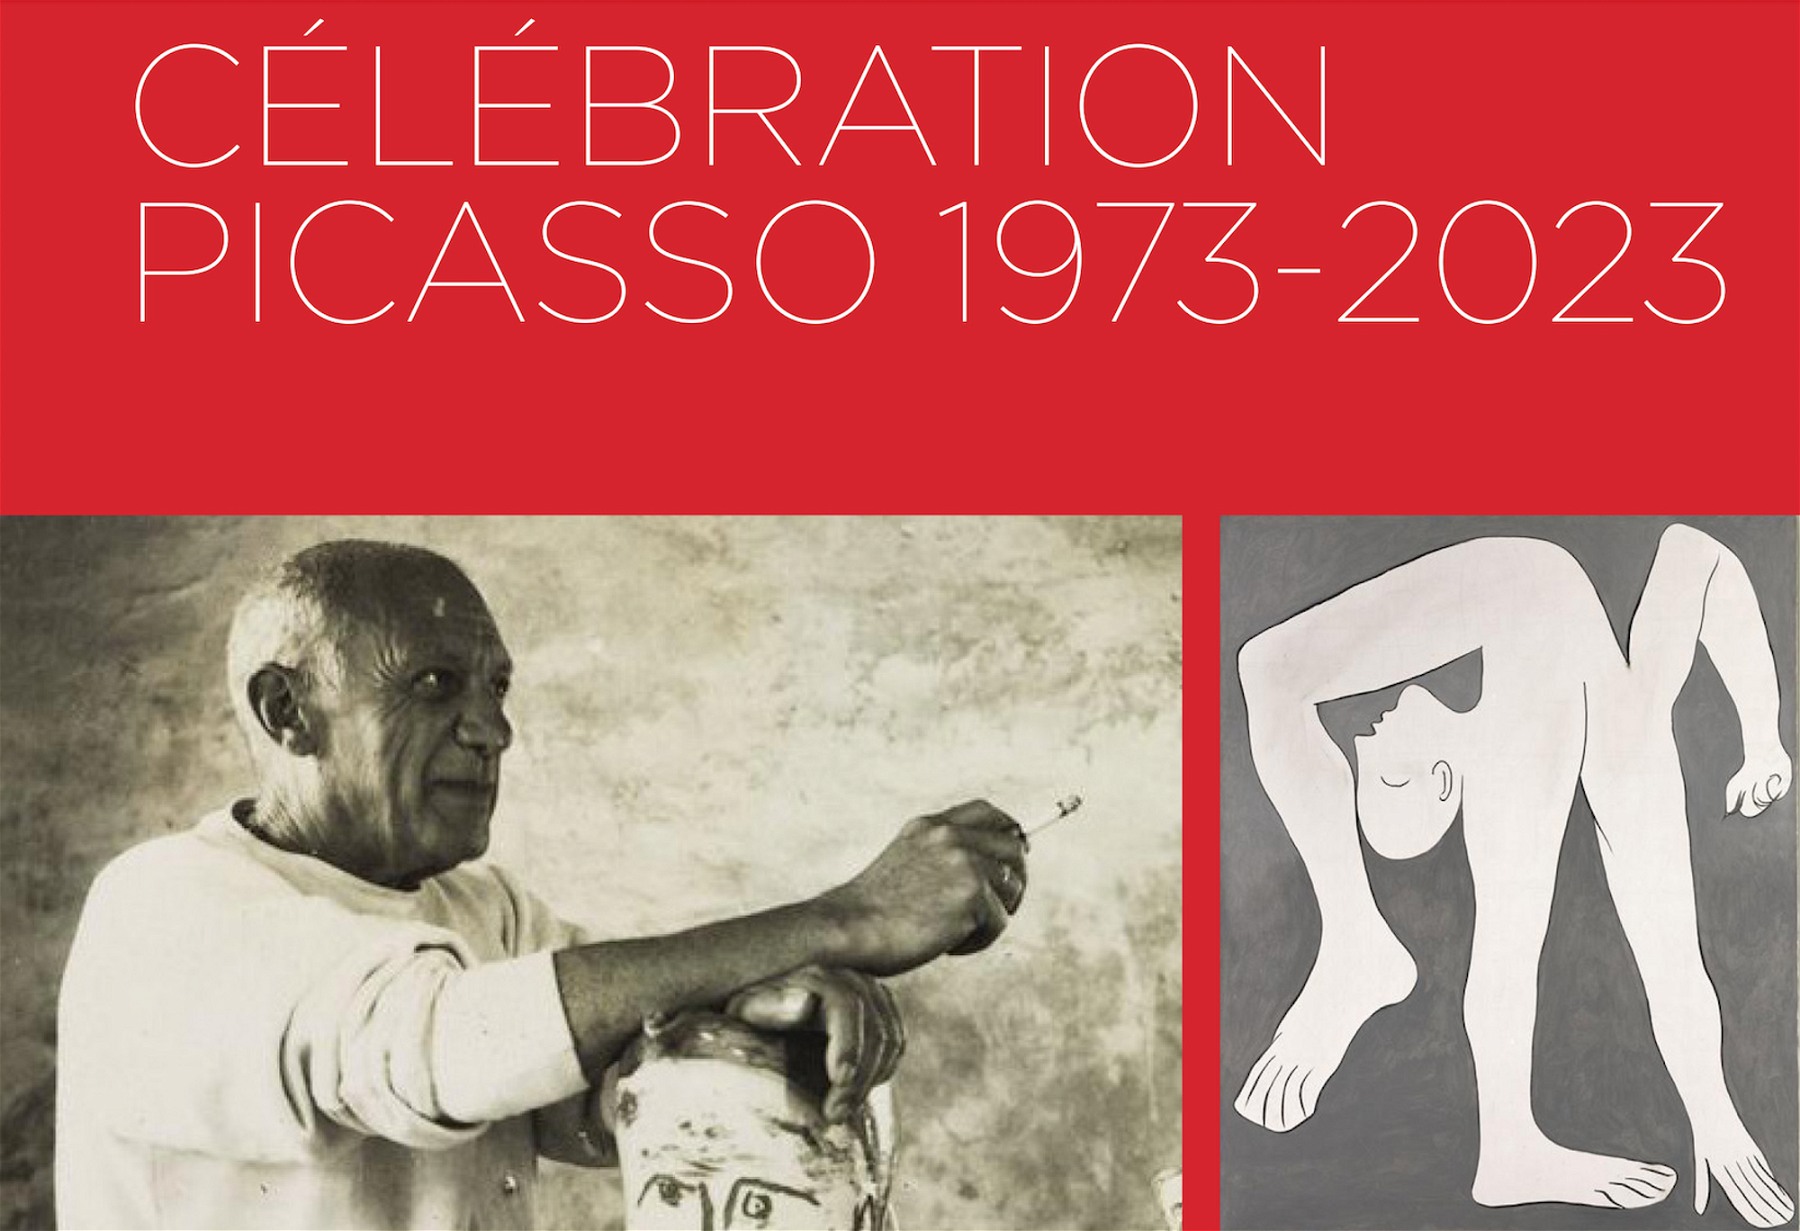 Celebrating Picasso 1973-2023: ARTSVP’s selection of best art shows opening world-wide